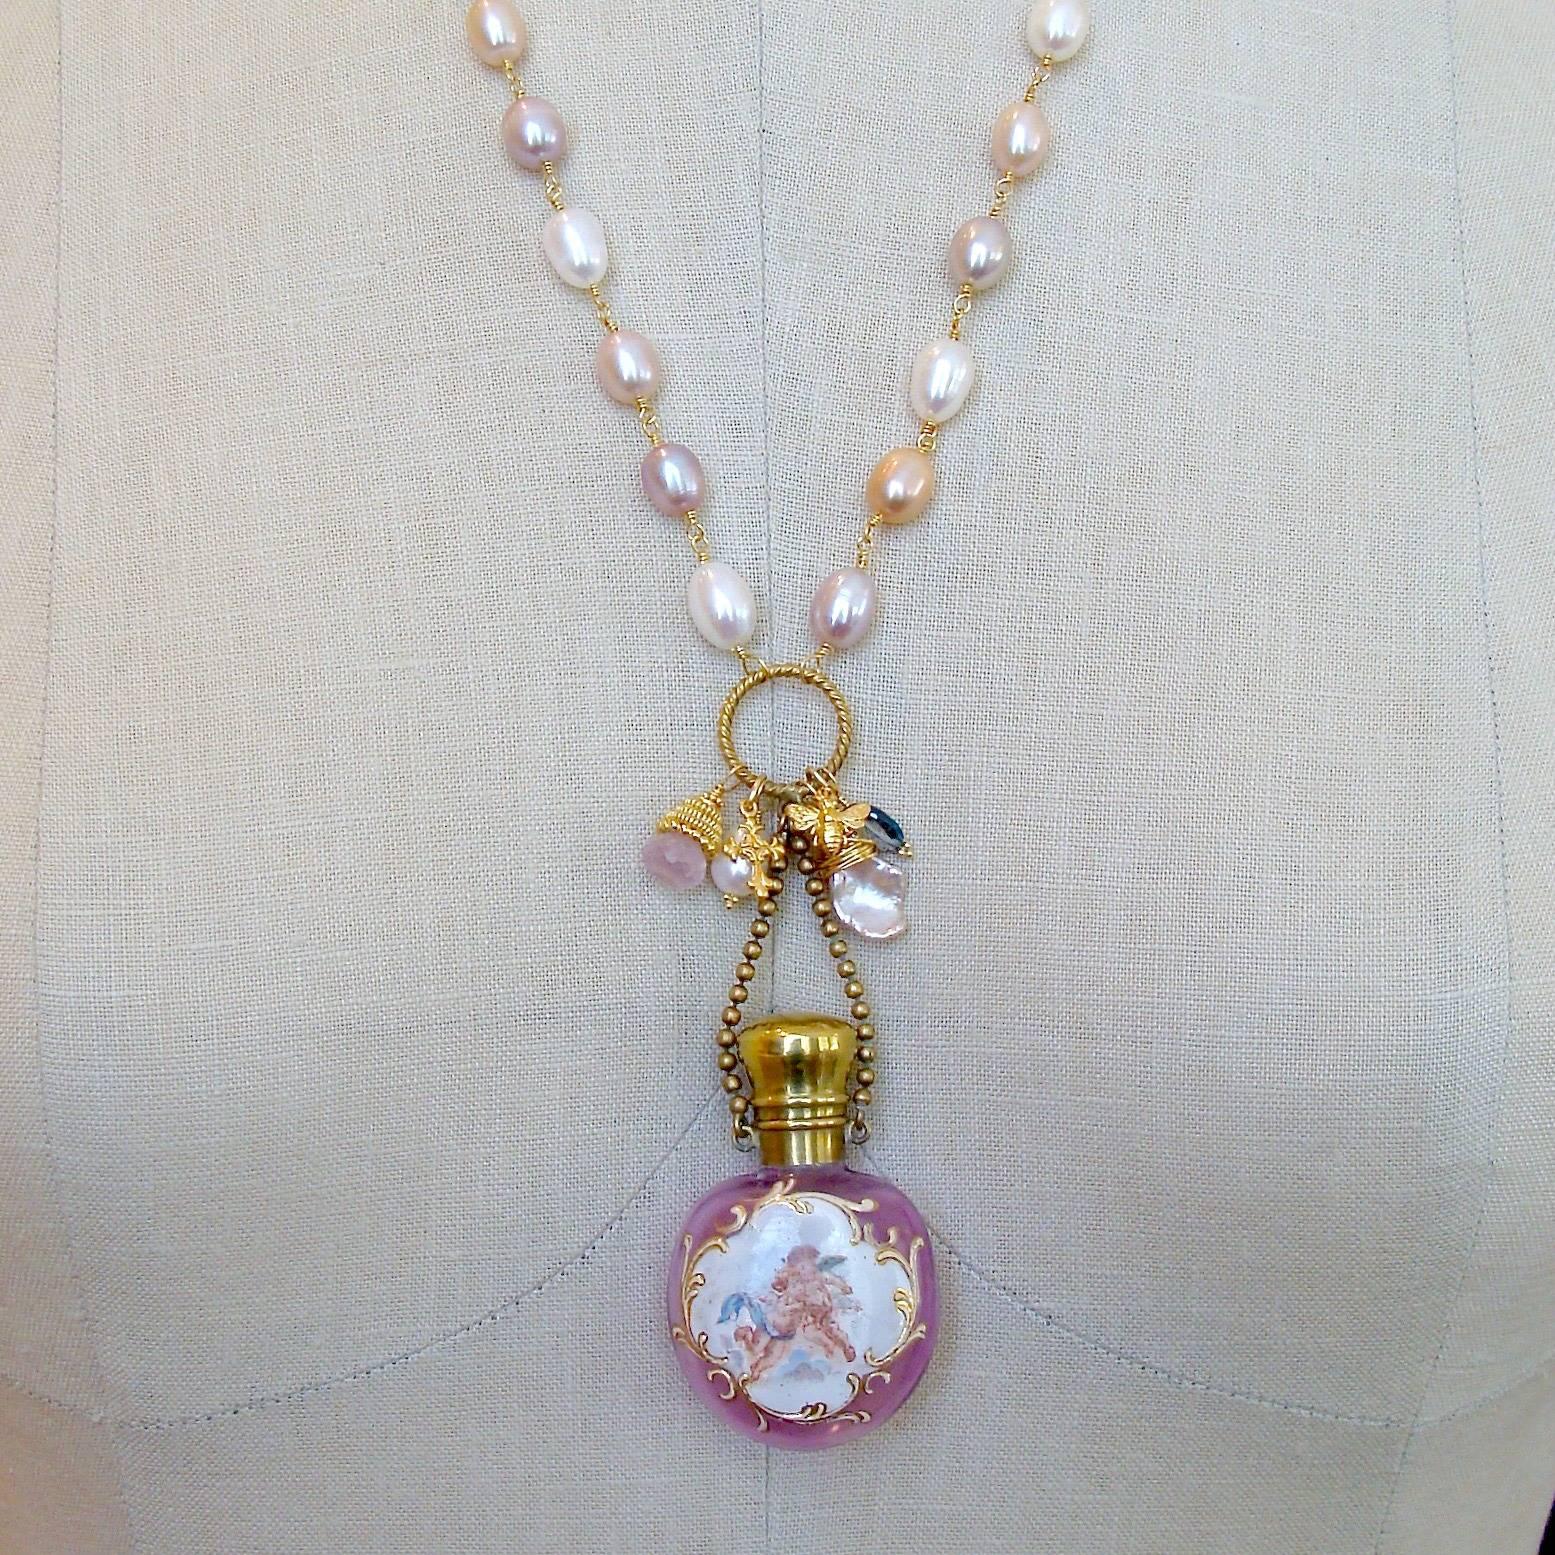 Pink Pearls Cherub Chatelaine Scent Bottle Necklace 1